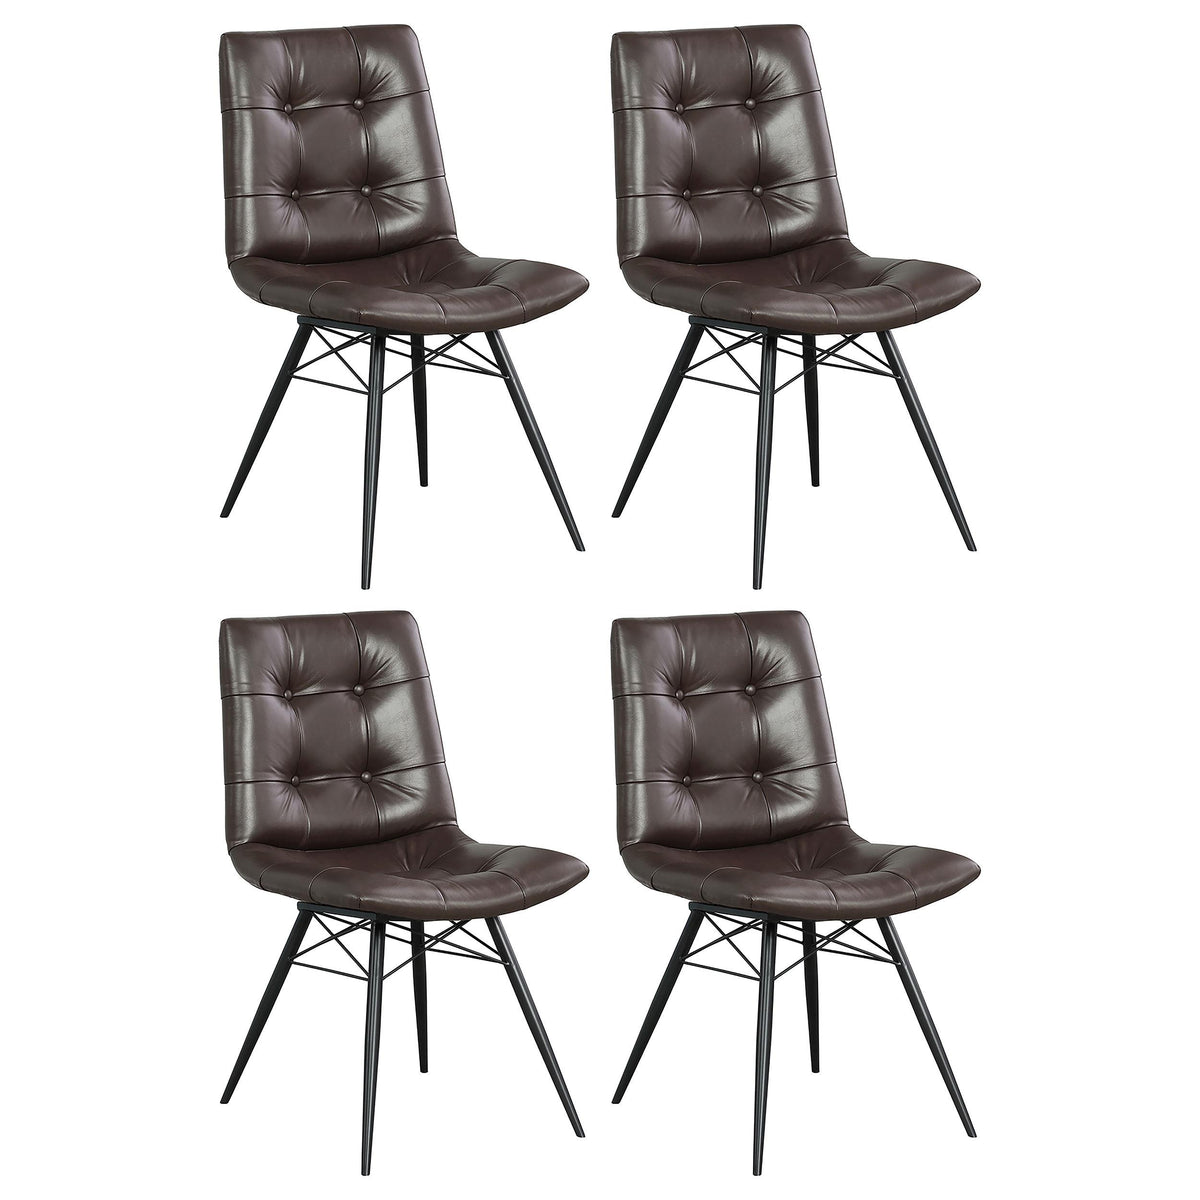 Aiken Upholstered Tufted Side Chairs Brown (Set of 4)  Las Vegas Furniture Stores